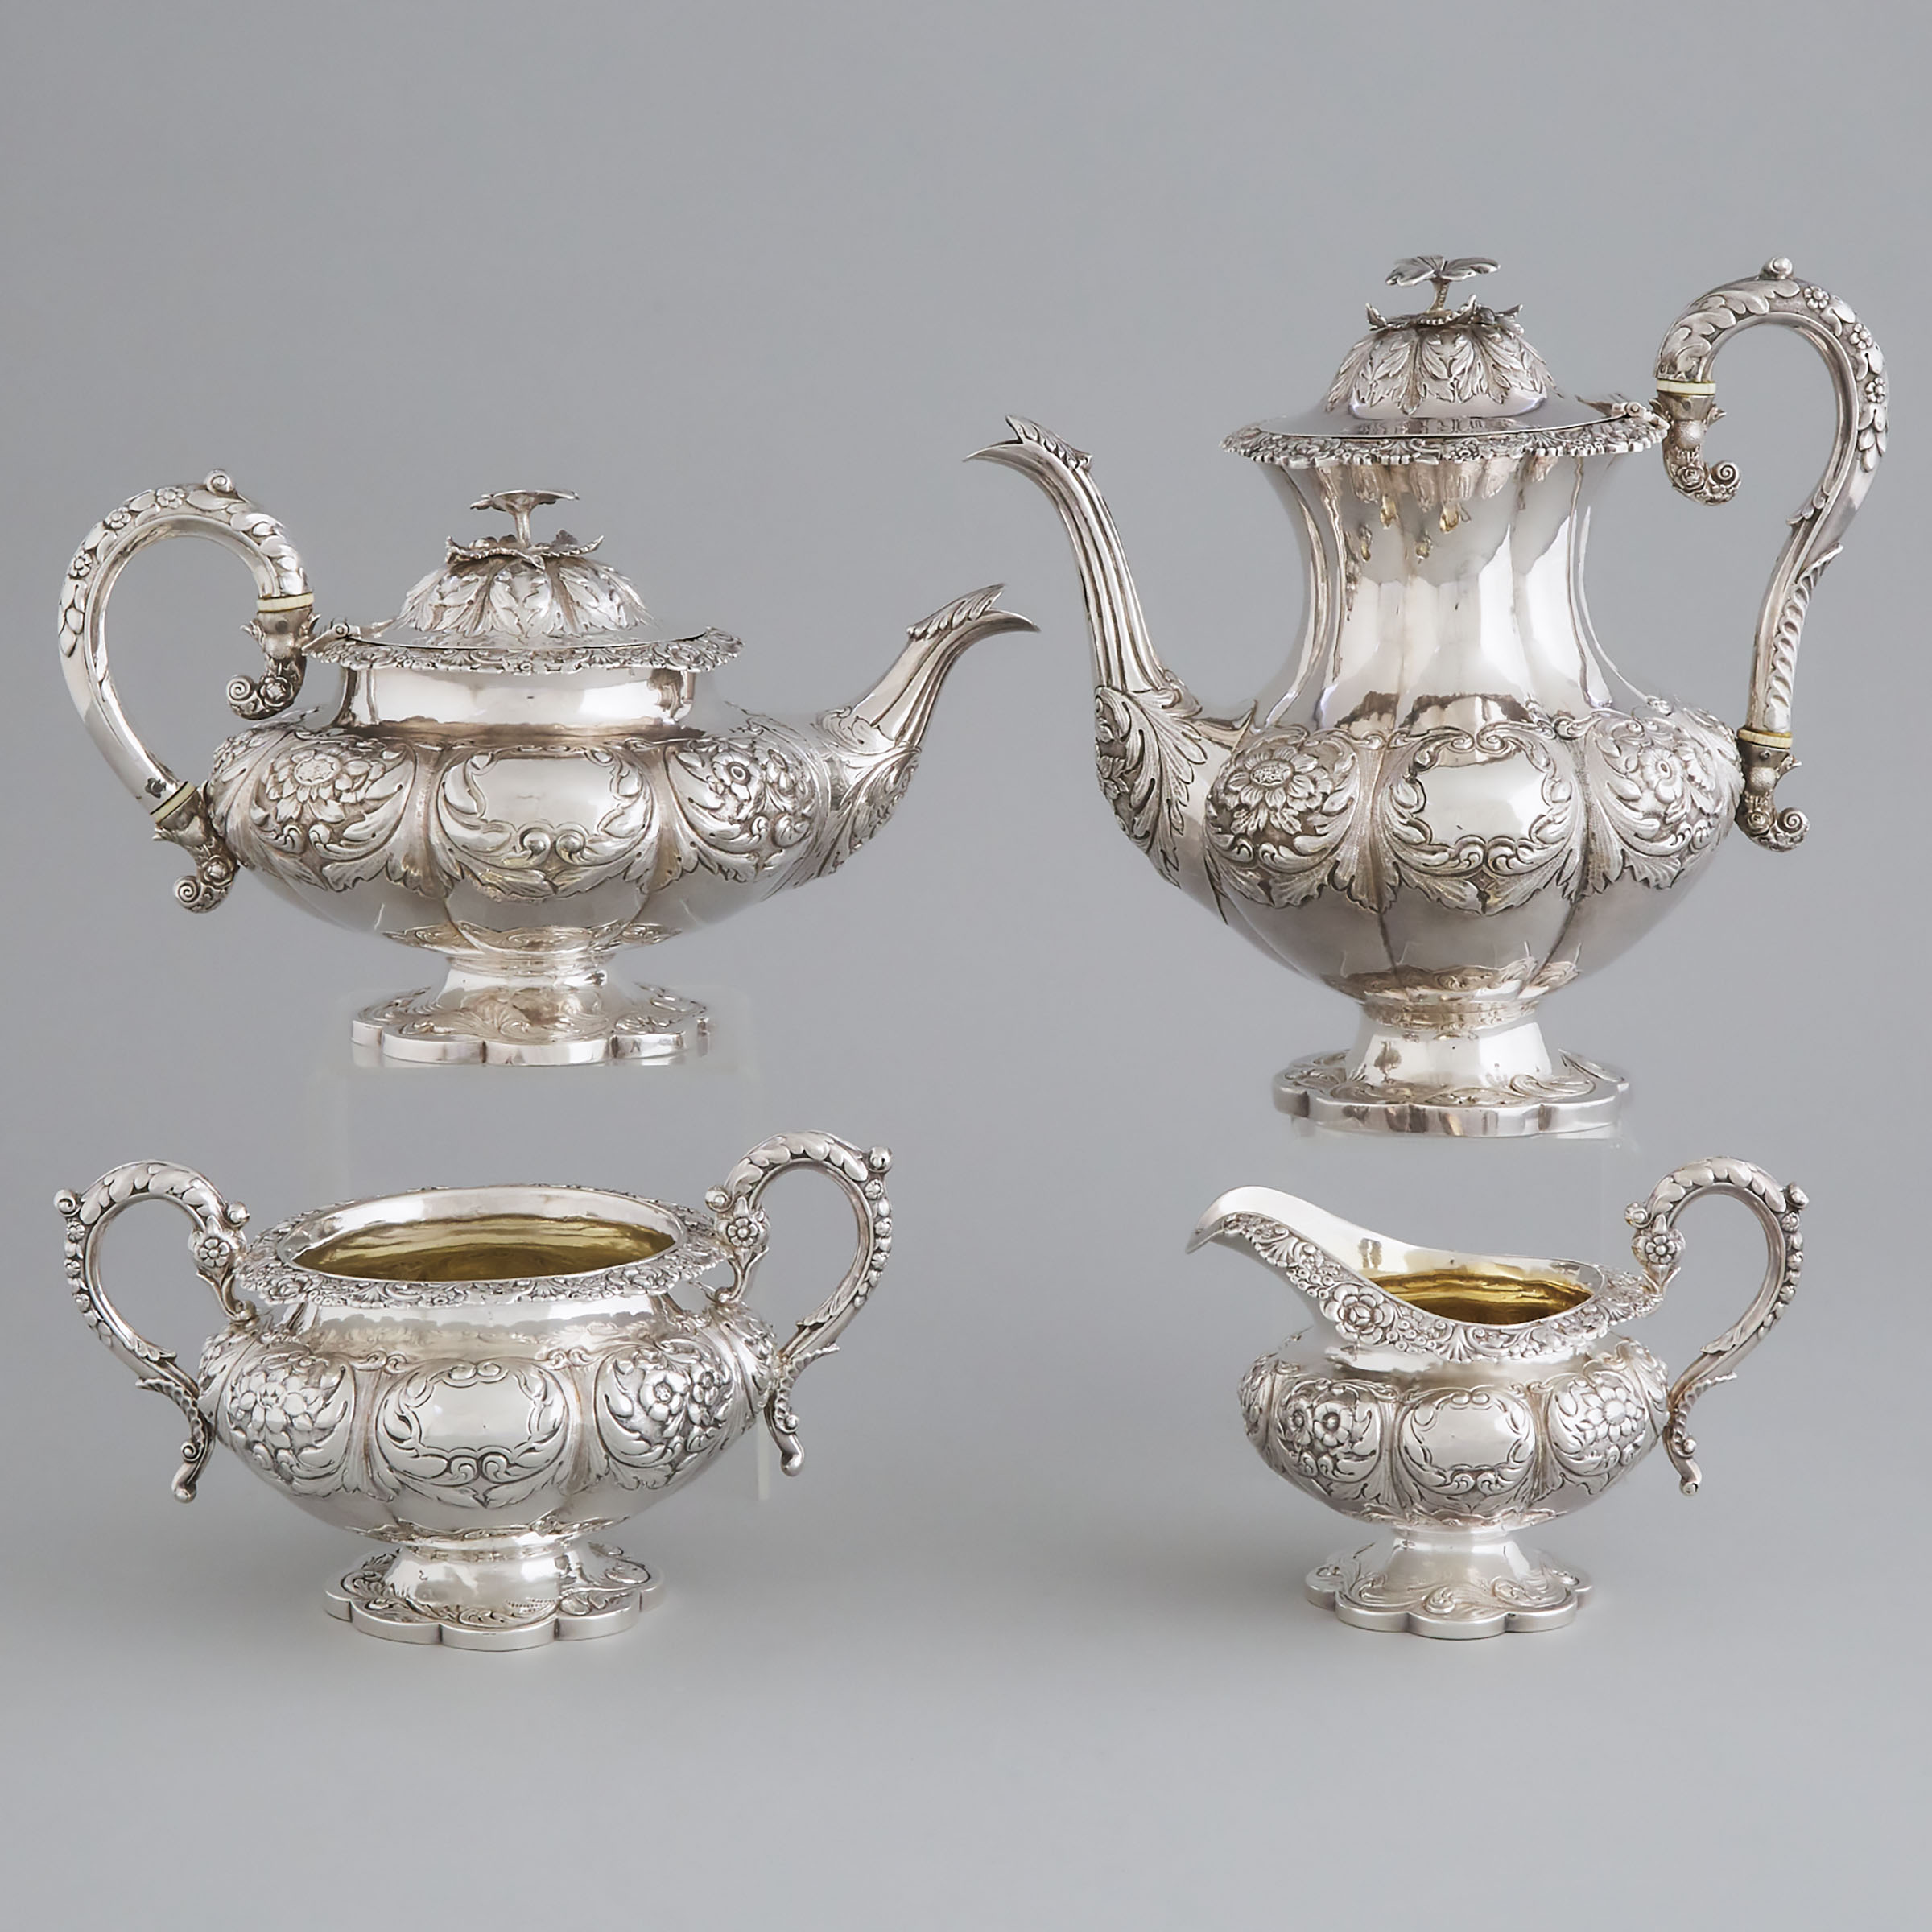 William IV Silver Tea and Coffee Service, London, 1834